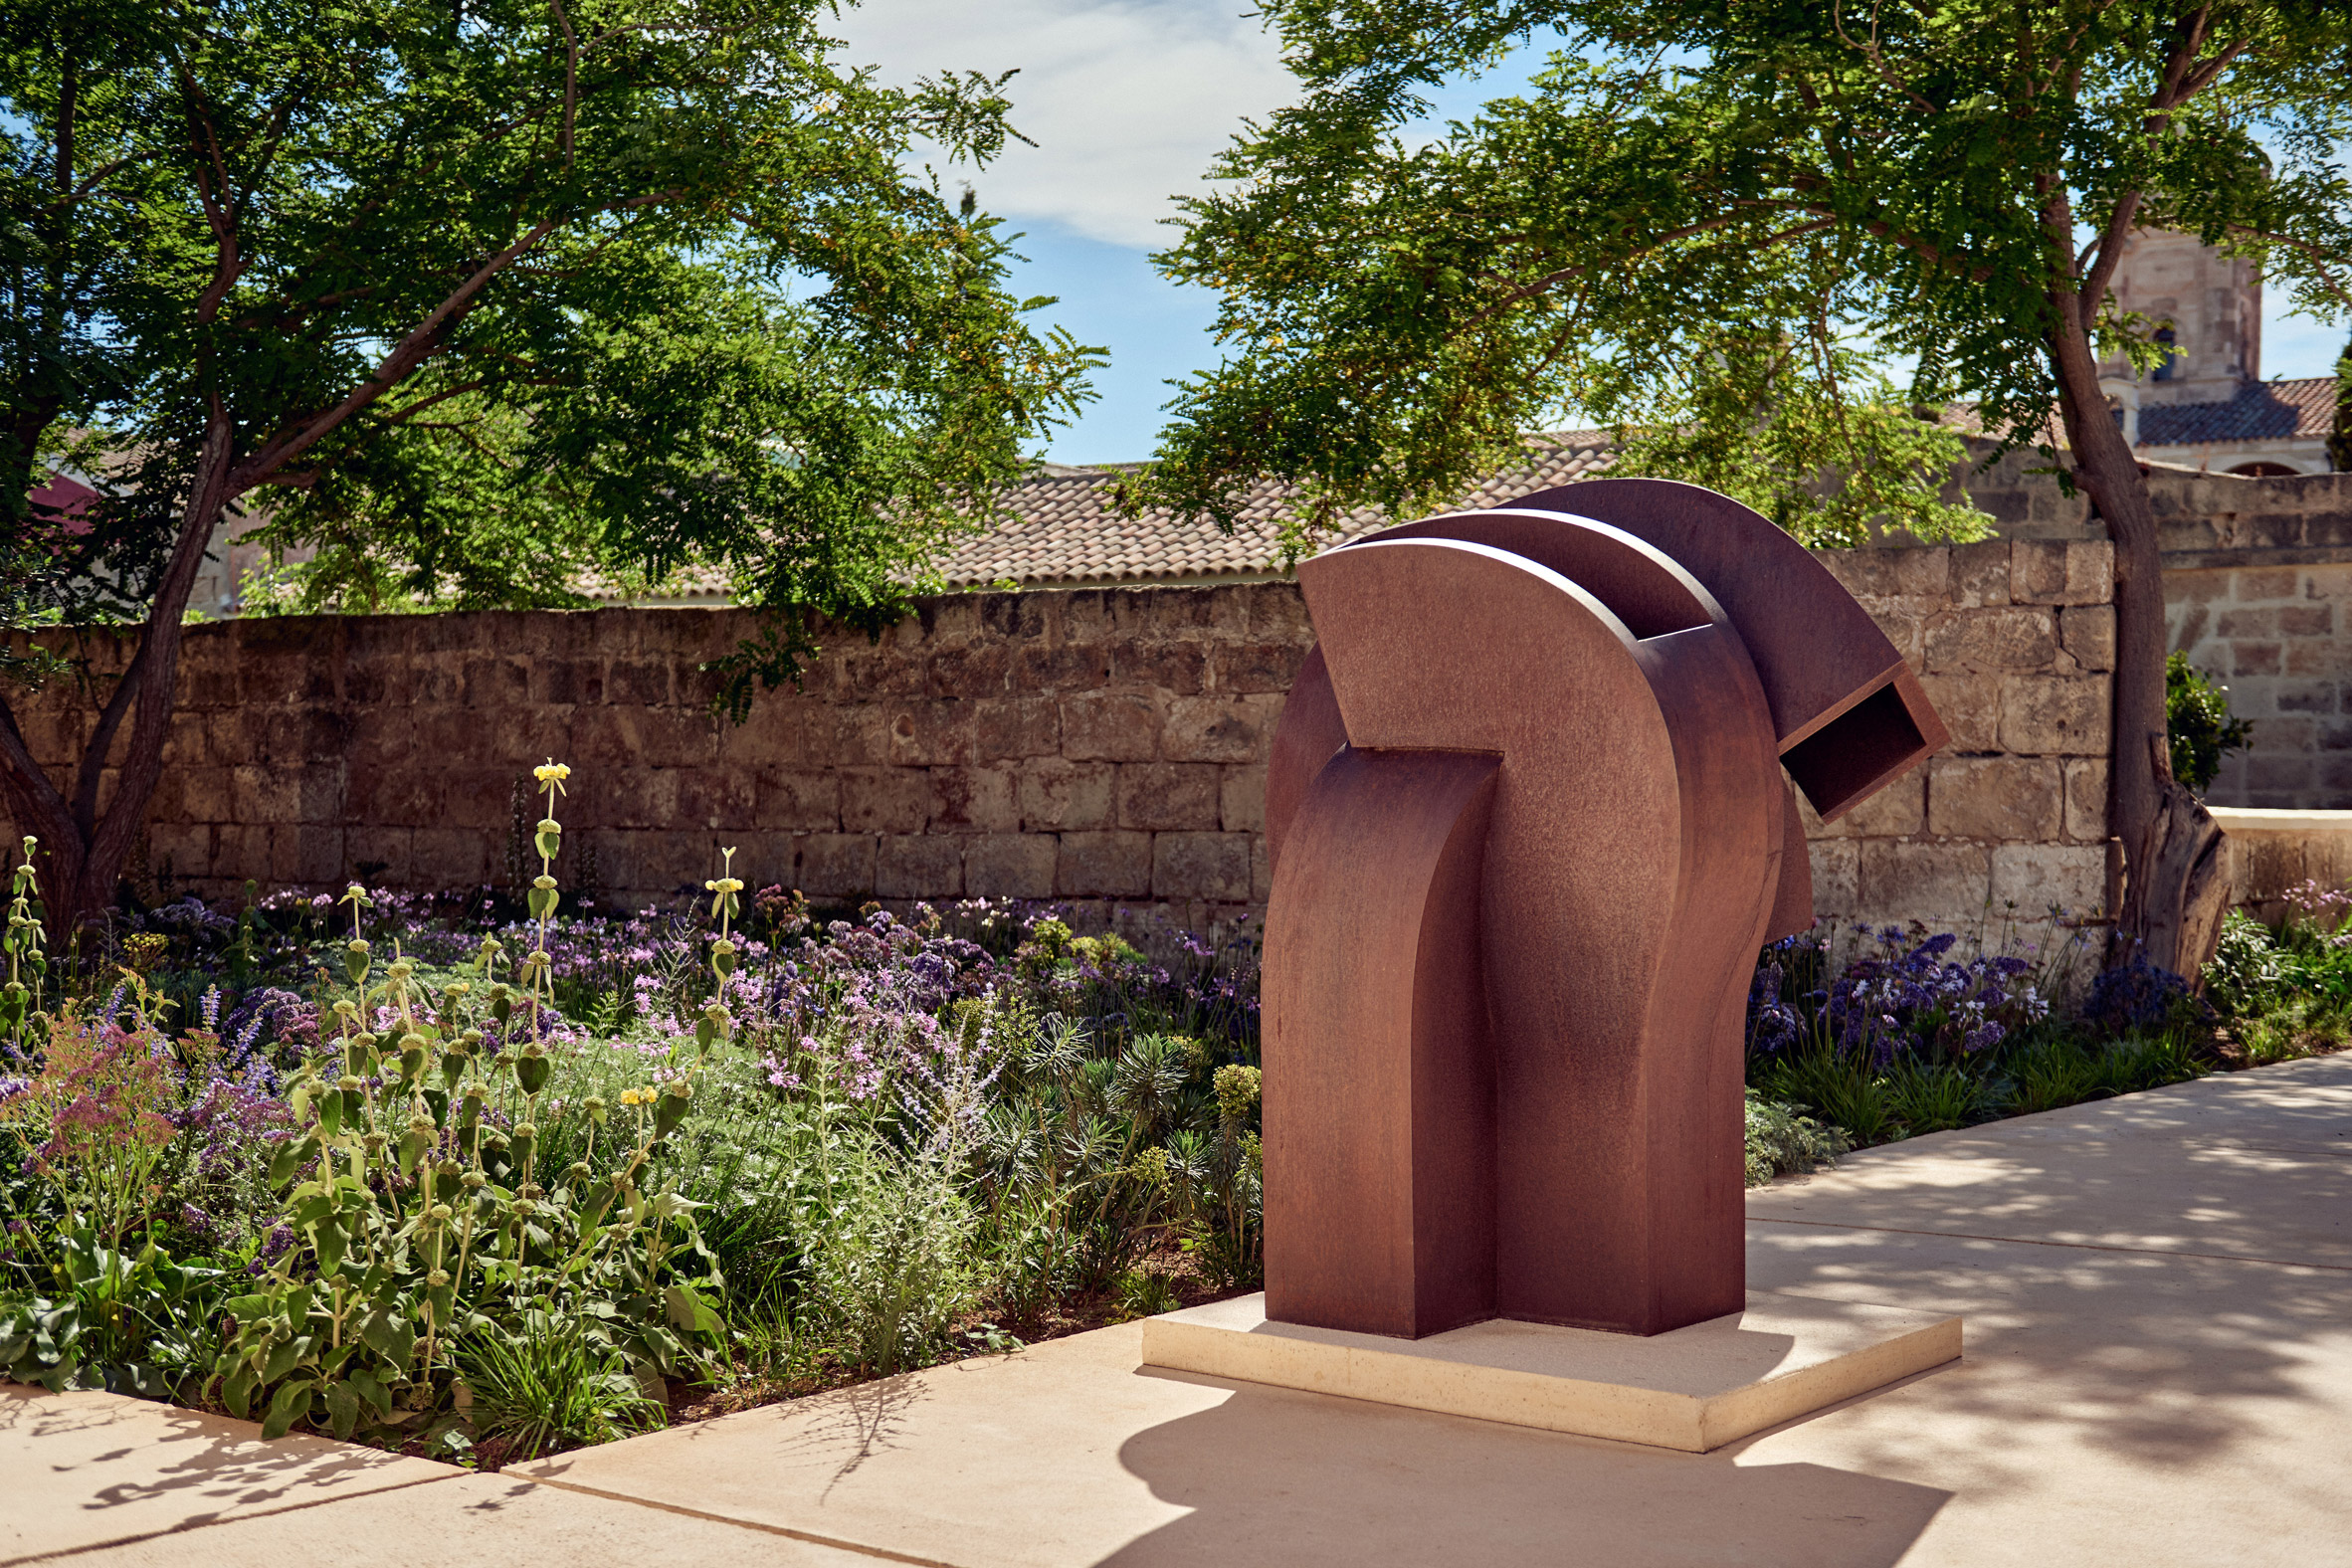 There is a sculpture trail at Hauser & Wirth Menorca